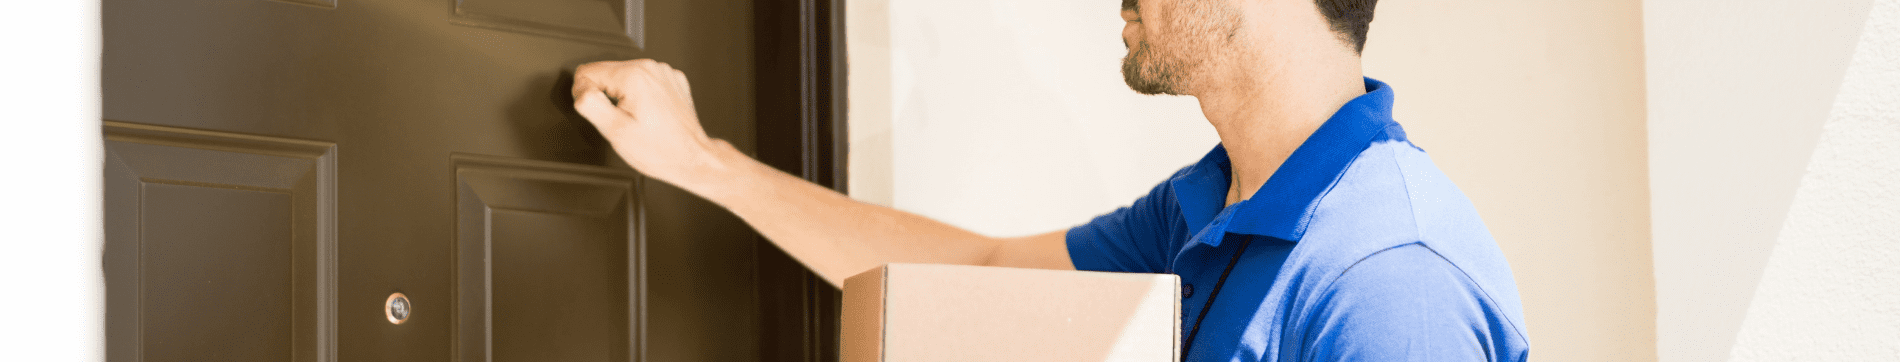 Delivery person knocking on a door while holding a package.